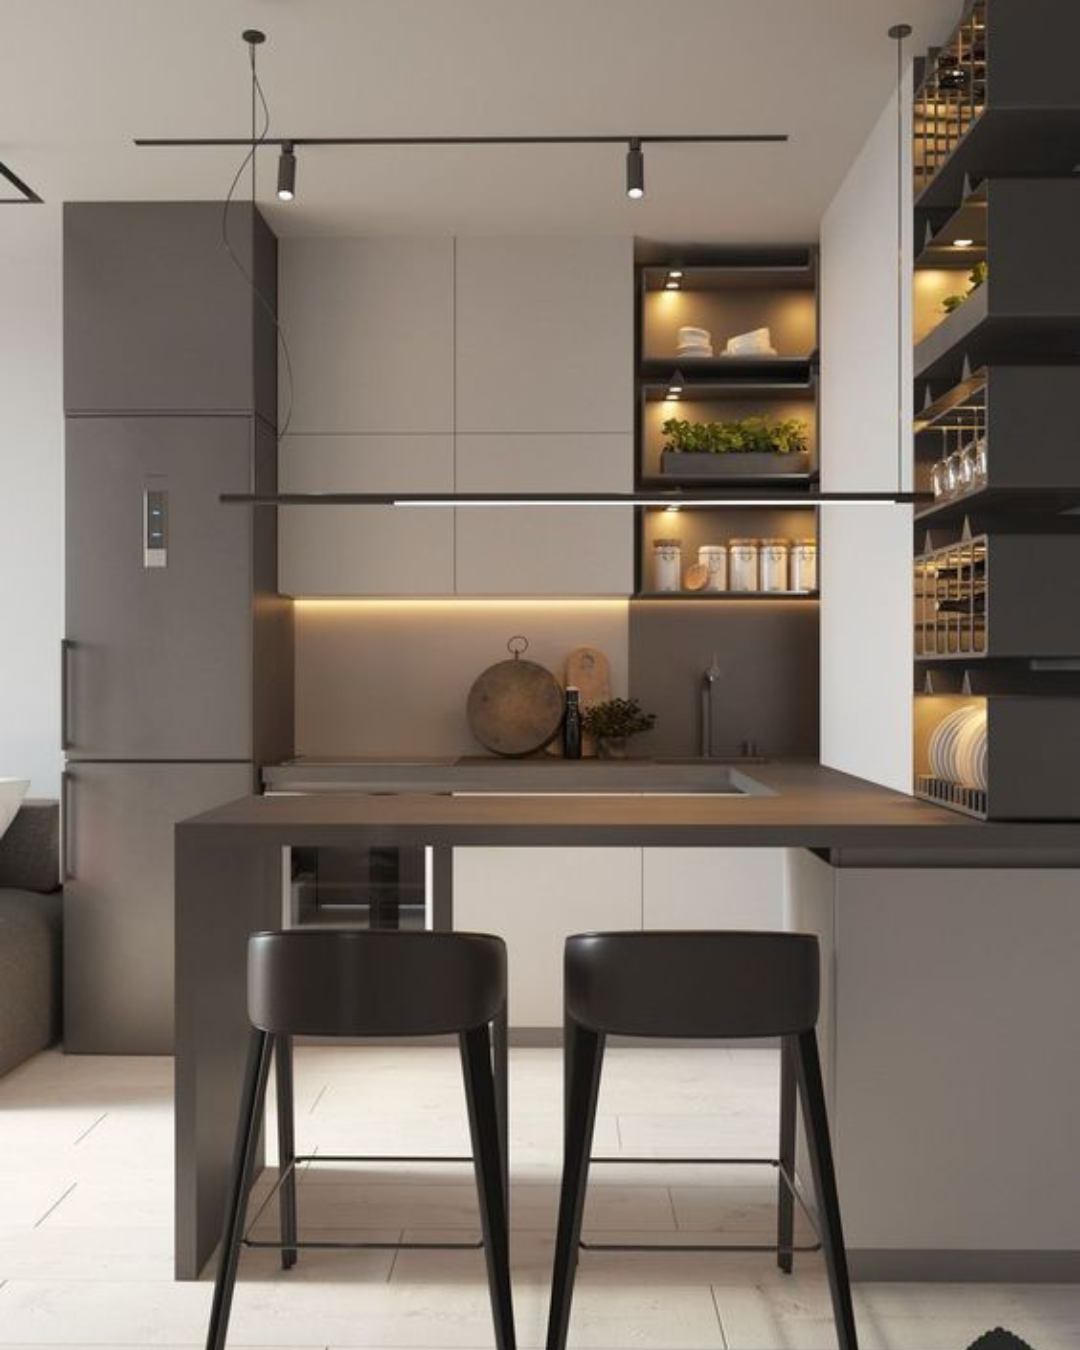 Top 10 Design Tips to Achieve The Perfect Small Modular Kitchen